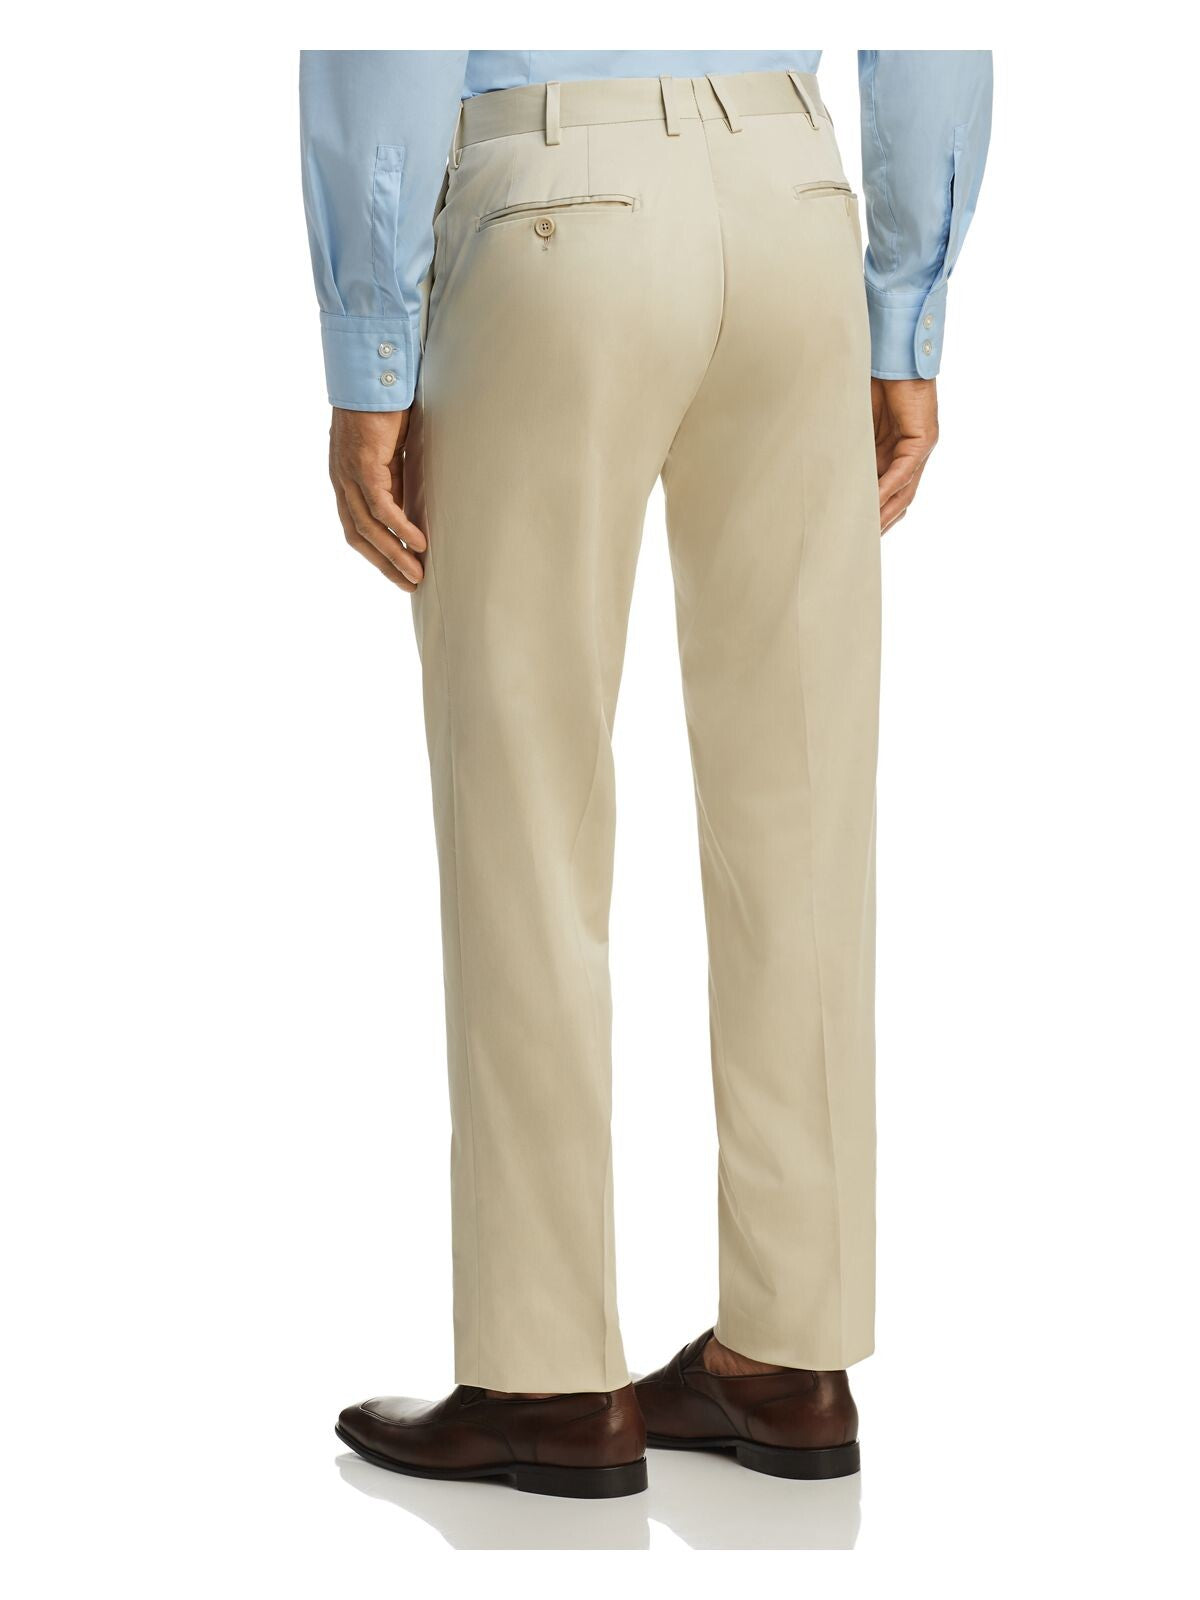 THE MENS STORE Mens Beige Flat Front, Tapered, Classic Fit Stretch Suit Separate Pants W44